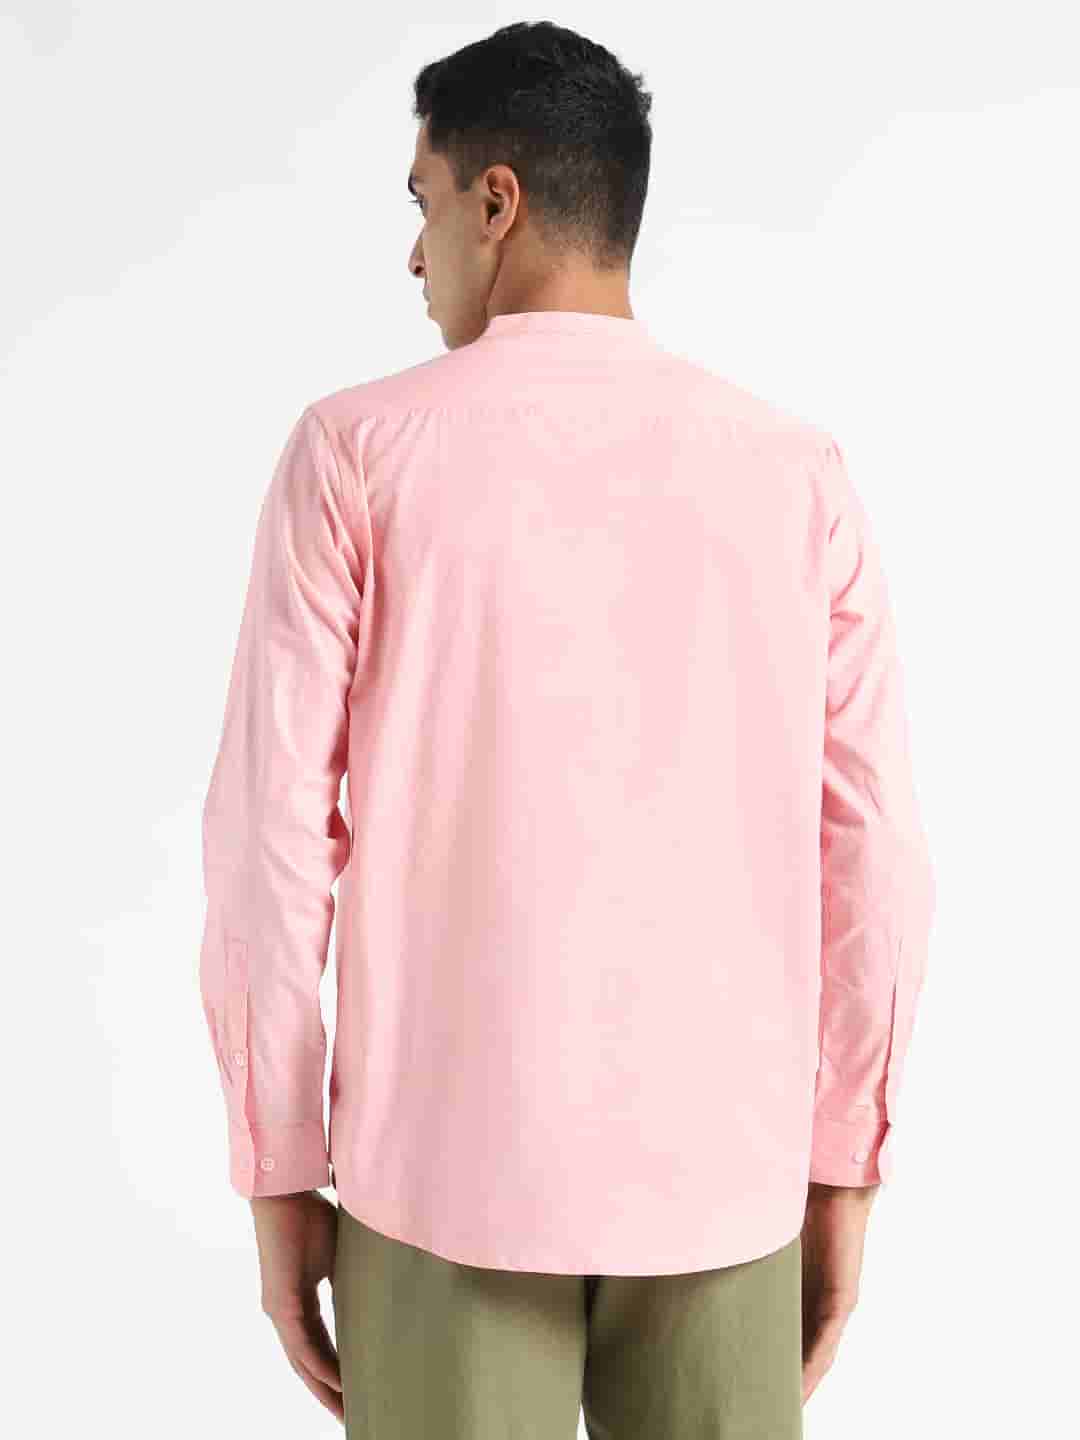 Organic Cotton & Naturally Dyed Mens Round Neck Pink Shirt by Livbio